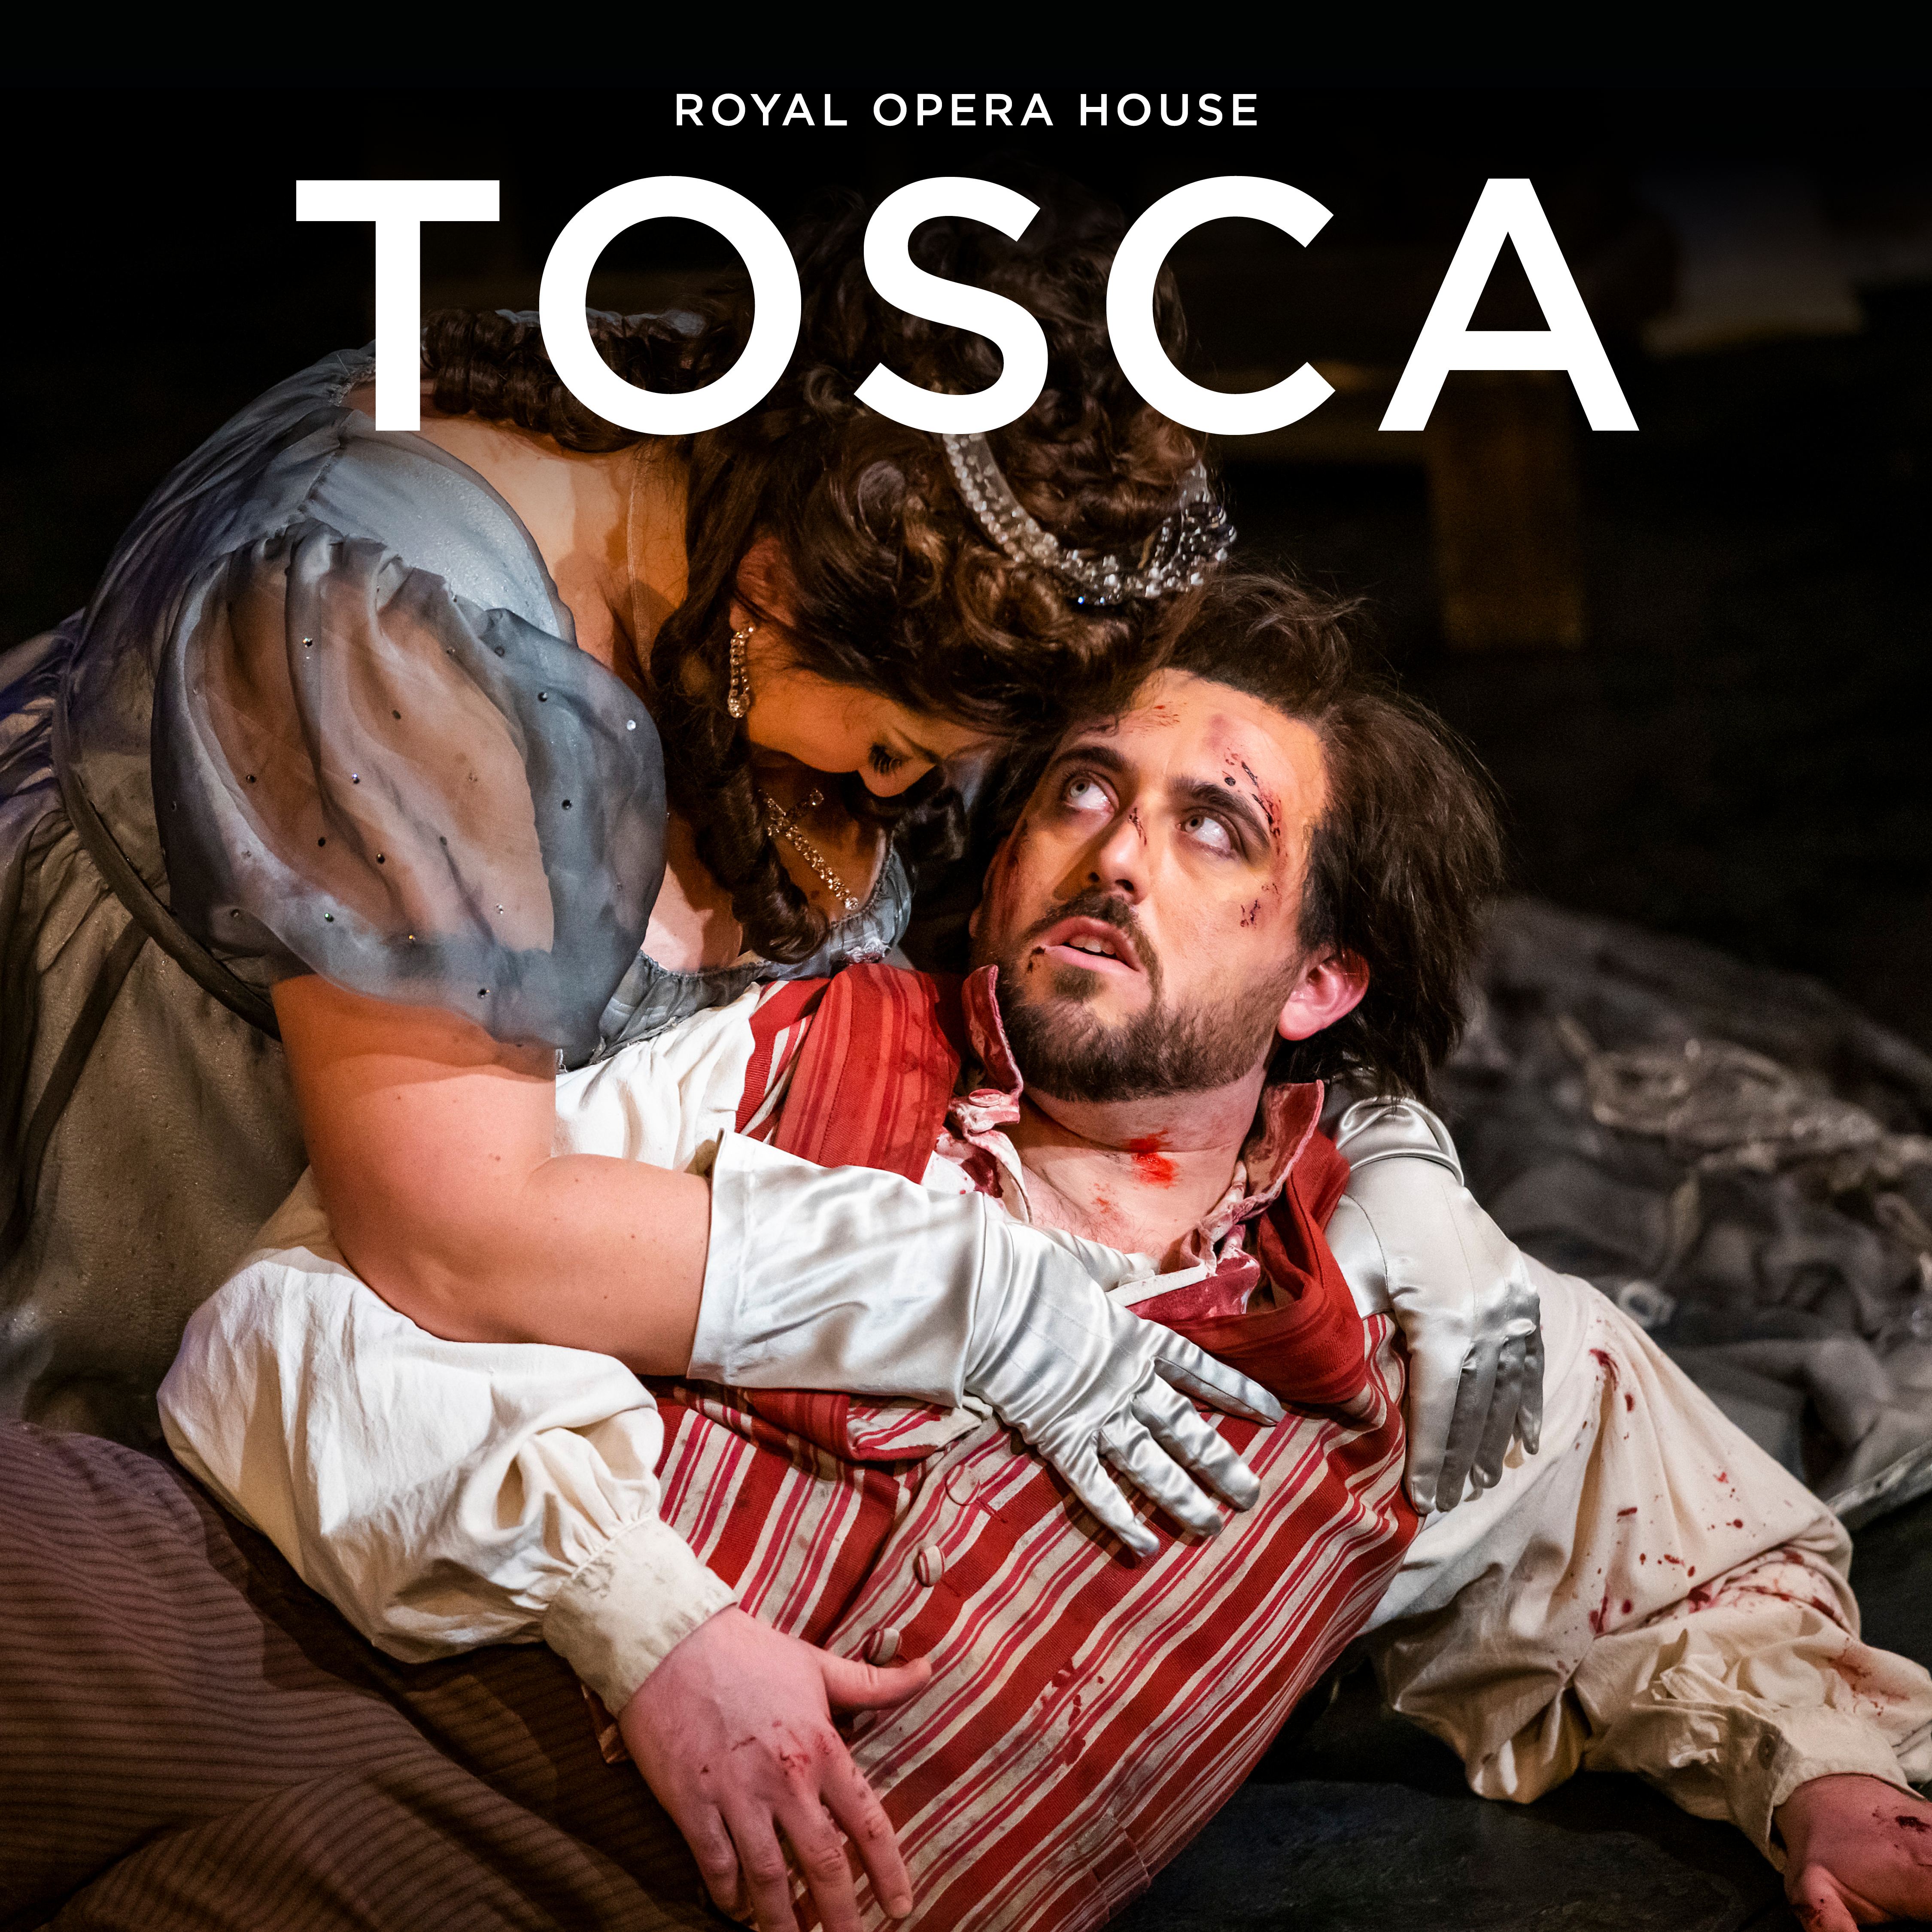 Tosca photo from the show